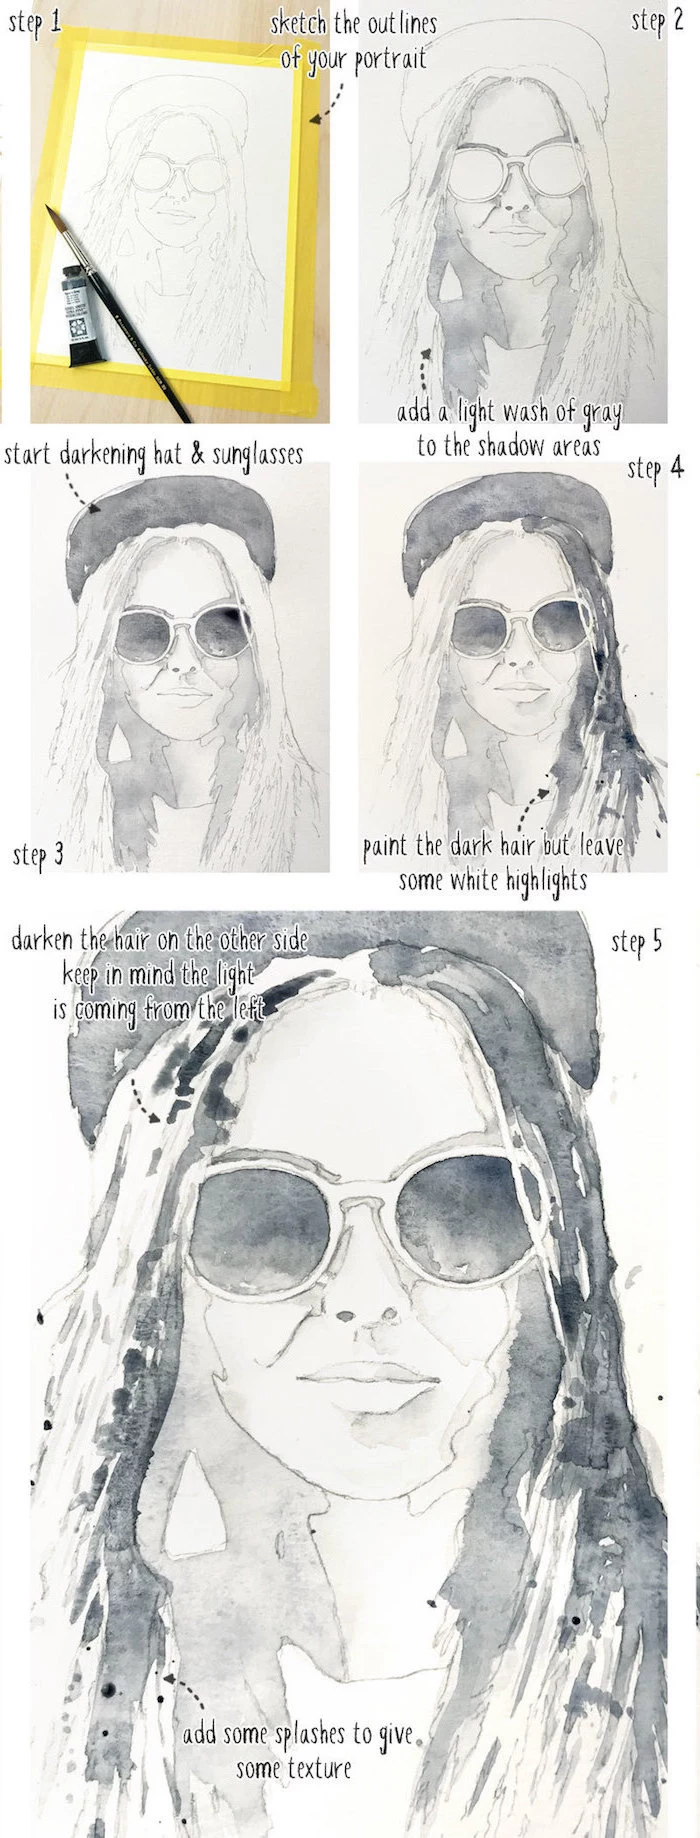 step by step diy tutorial, how to draw a girl, how to paint with watercolors, black and white watercolor painting